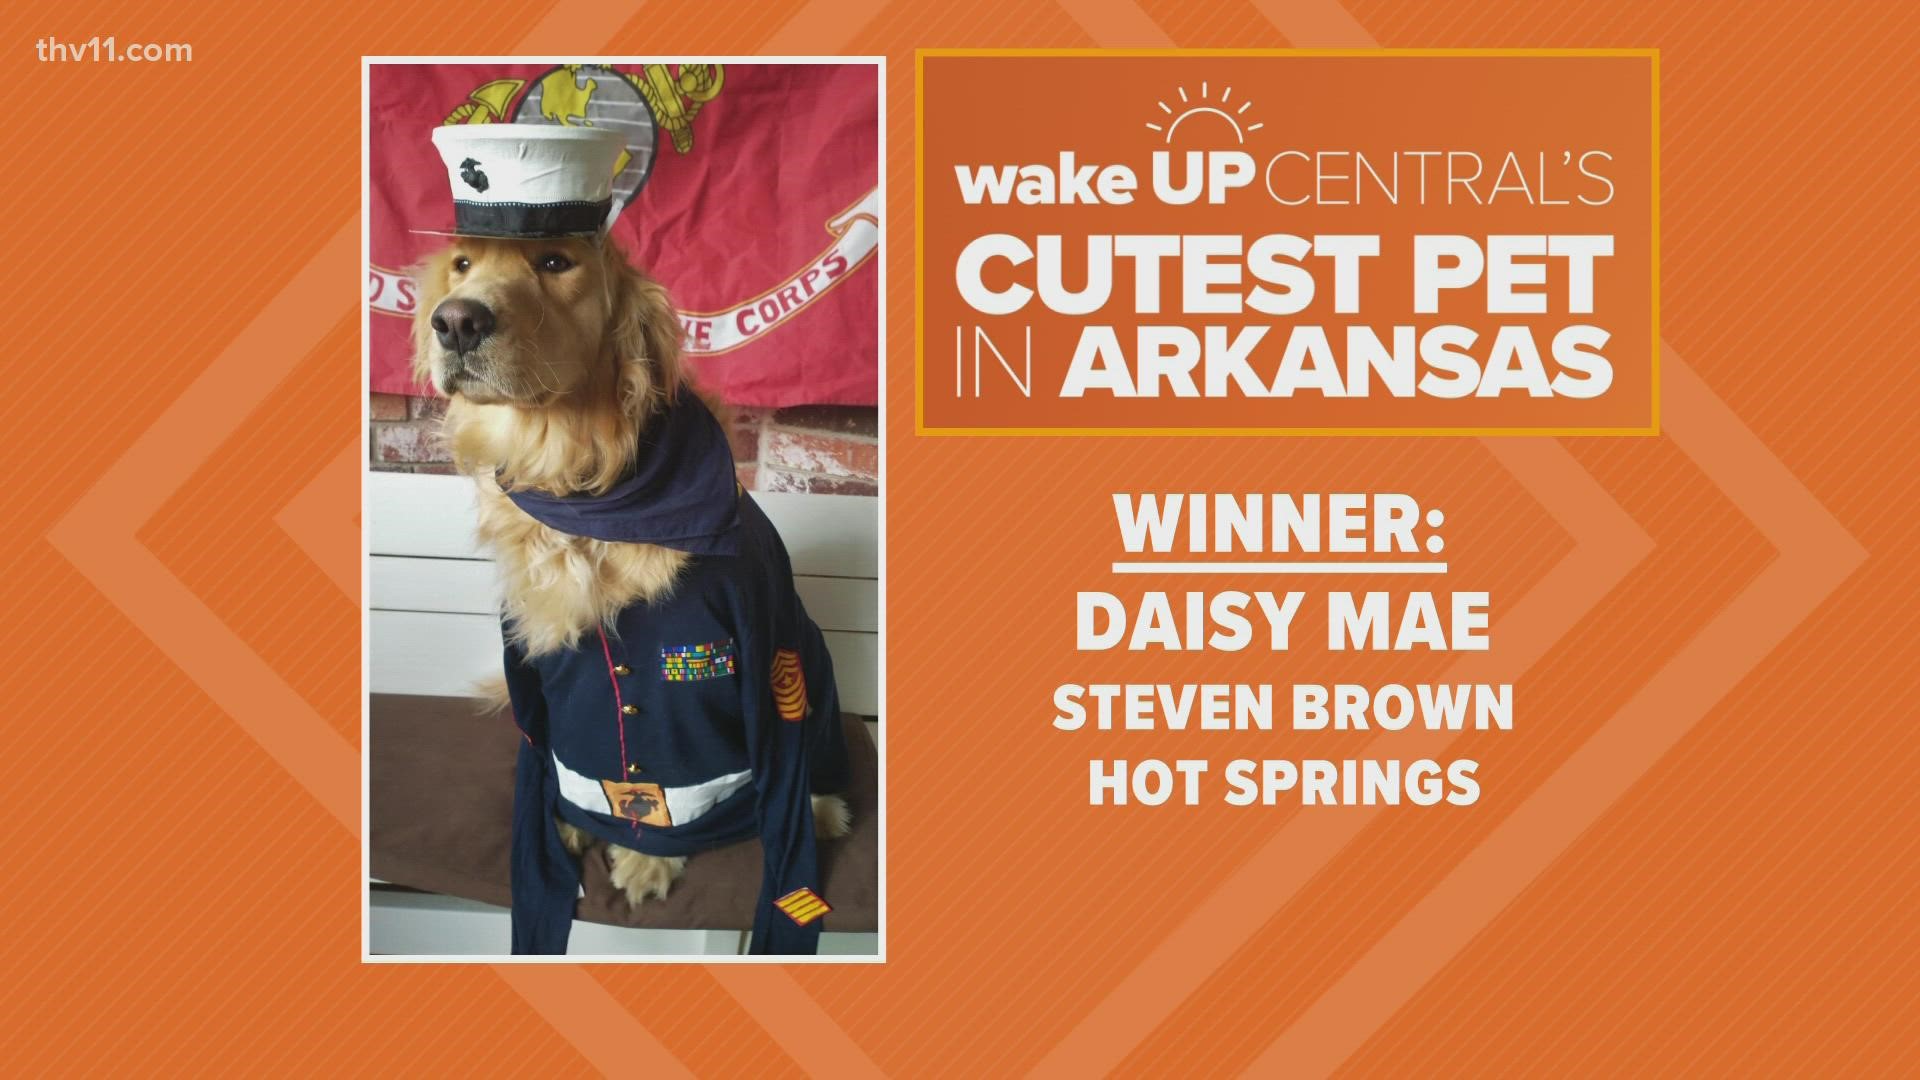 After more than 2,000 entries, it is time to crown the winner of wake up central's cutest pet in Arkansas contest and give away $1,000 from Kiko's Country RV!